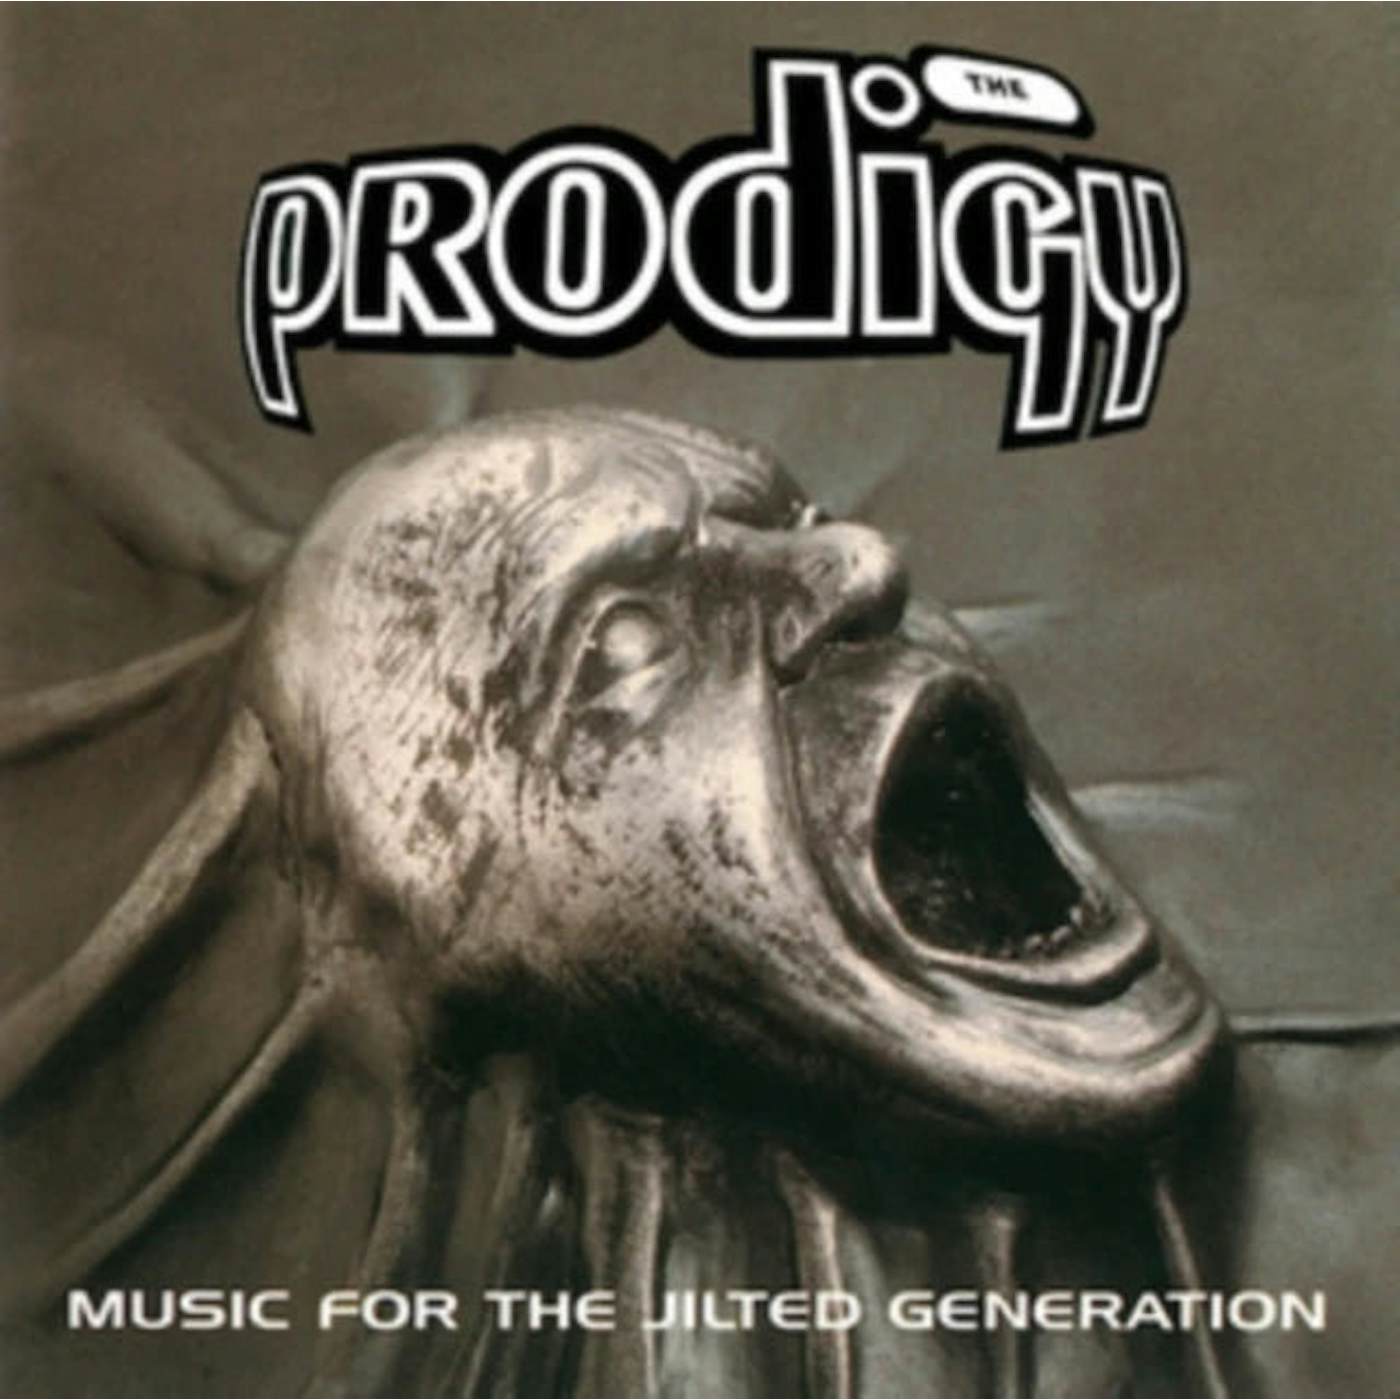 The Prodigy - Music for the Jilted Generation CD